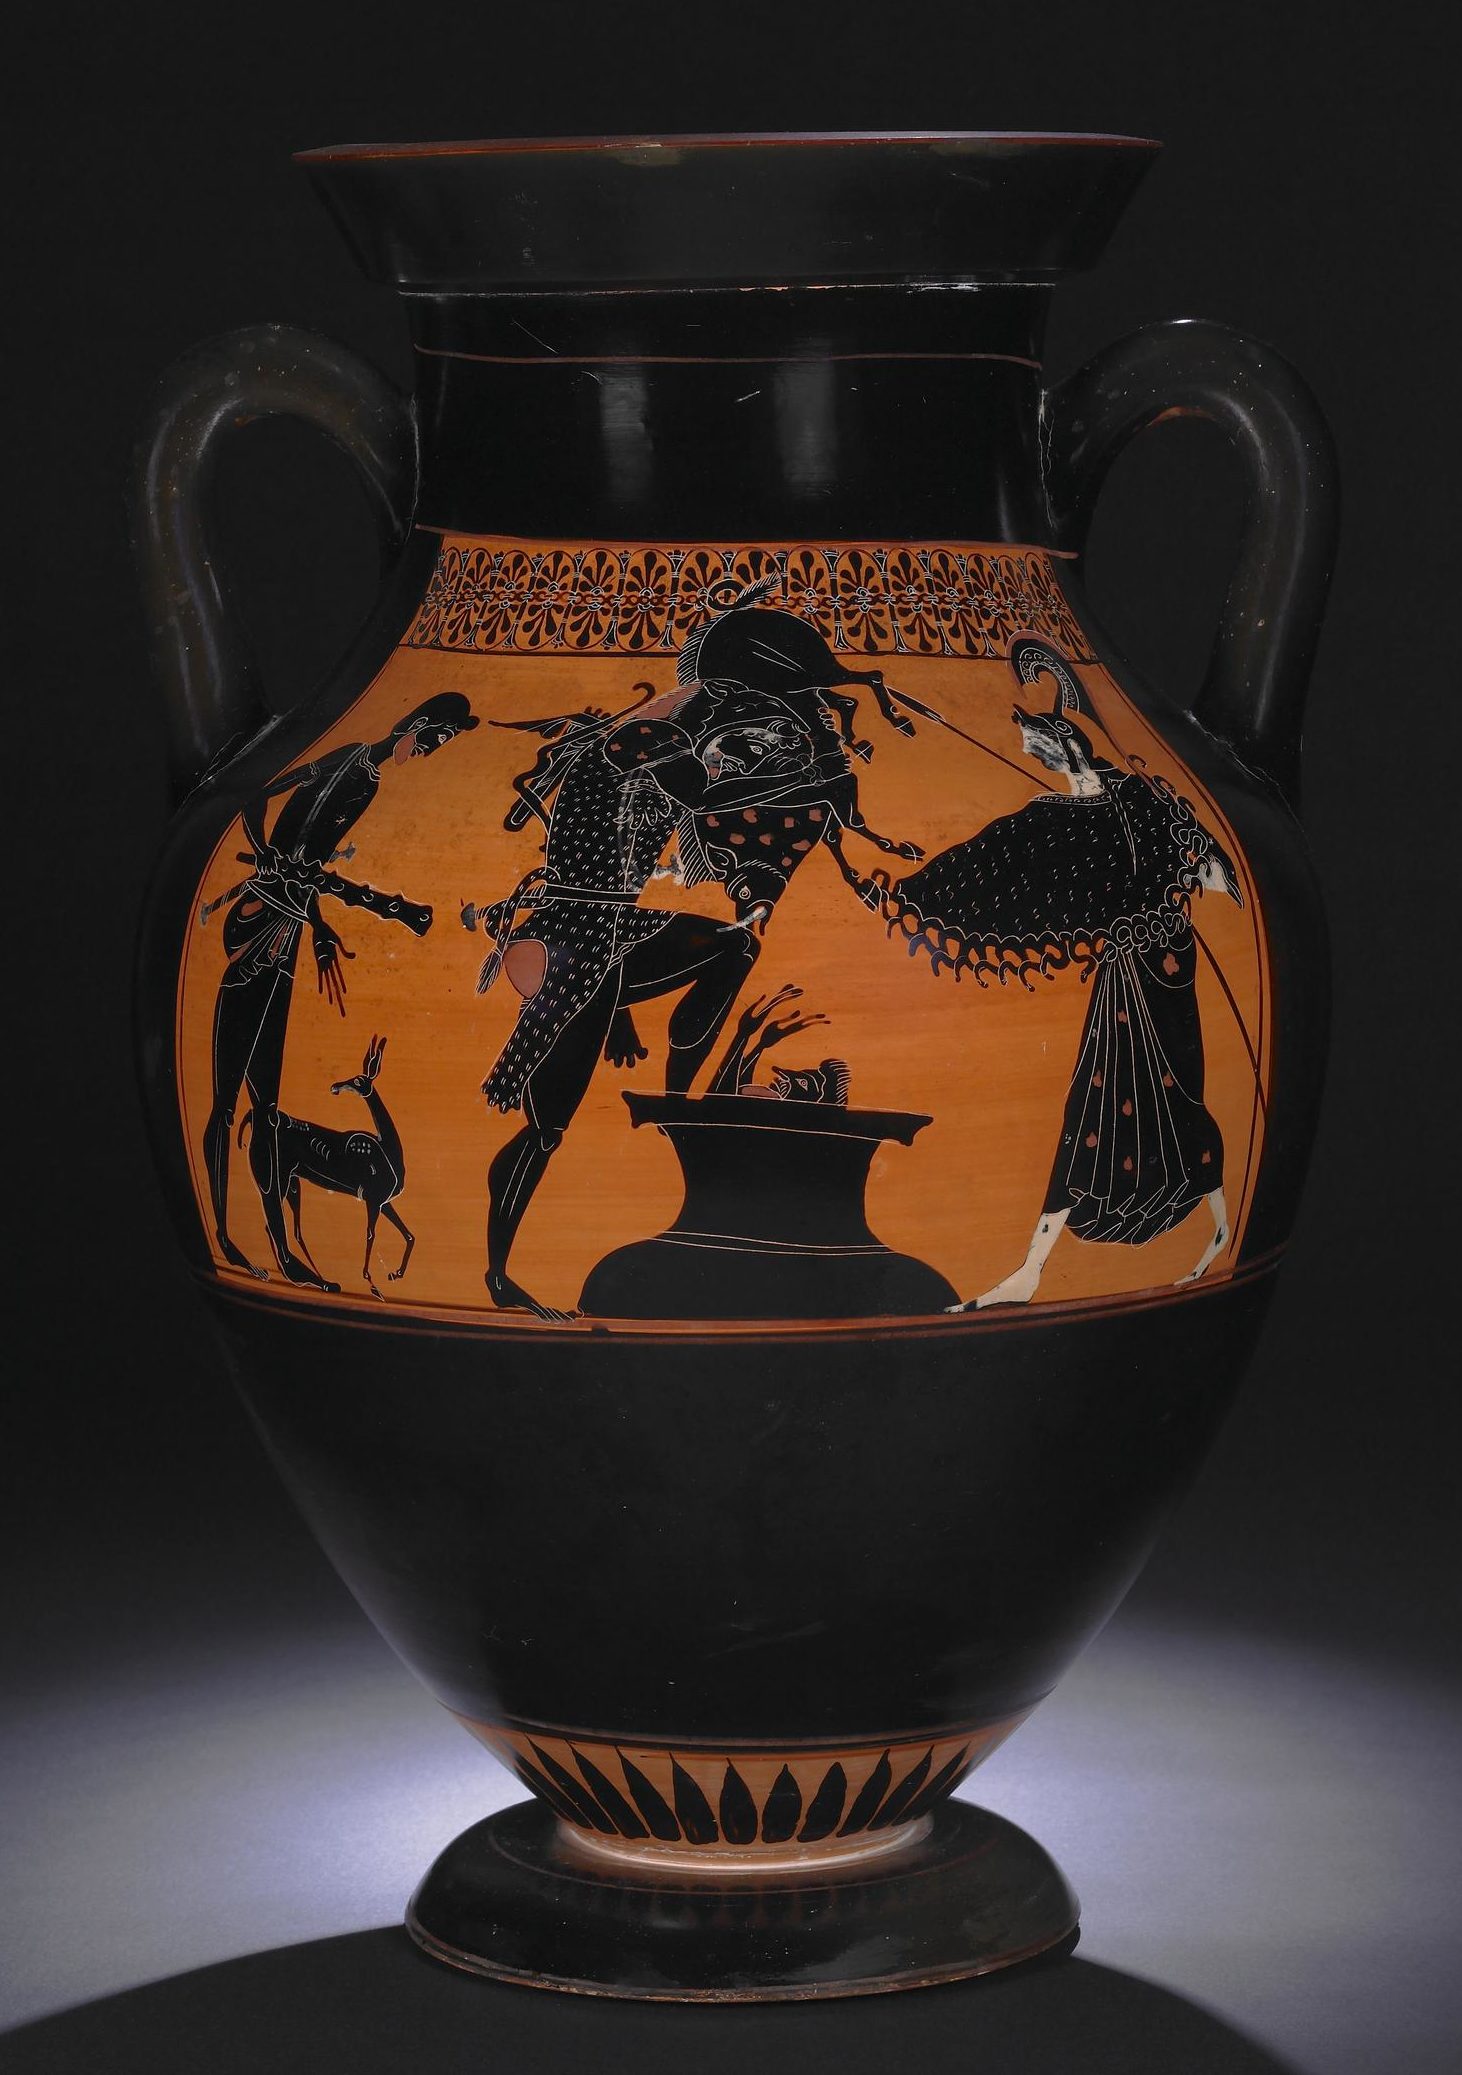 Heracles, holding the boar, stands with one foot on the rim of a pot that is set into the ground. Eurystheus hides in the pot, his arms and head sticking out, as Heracles drops the boar down on him. Iolaus stands behind Heracles with a deer at his feet and holding Heracles' club, and Athena stands to the right.